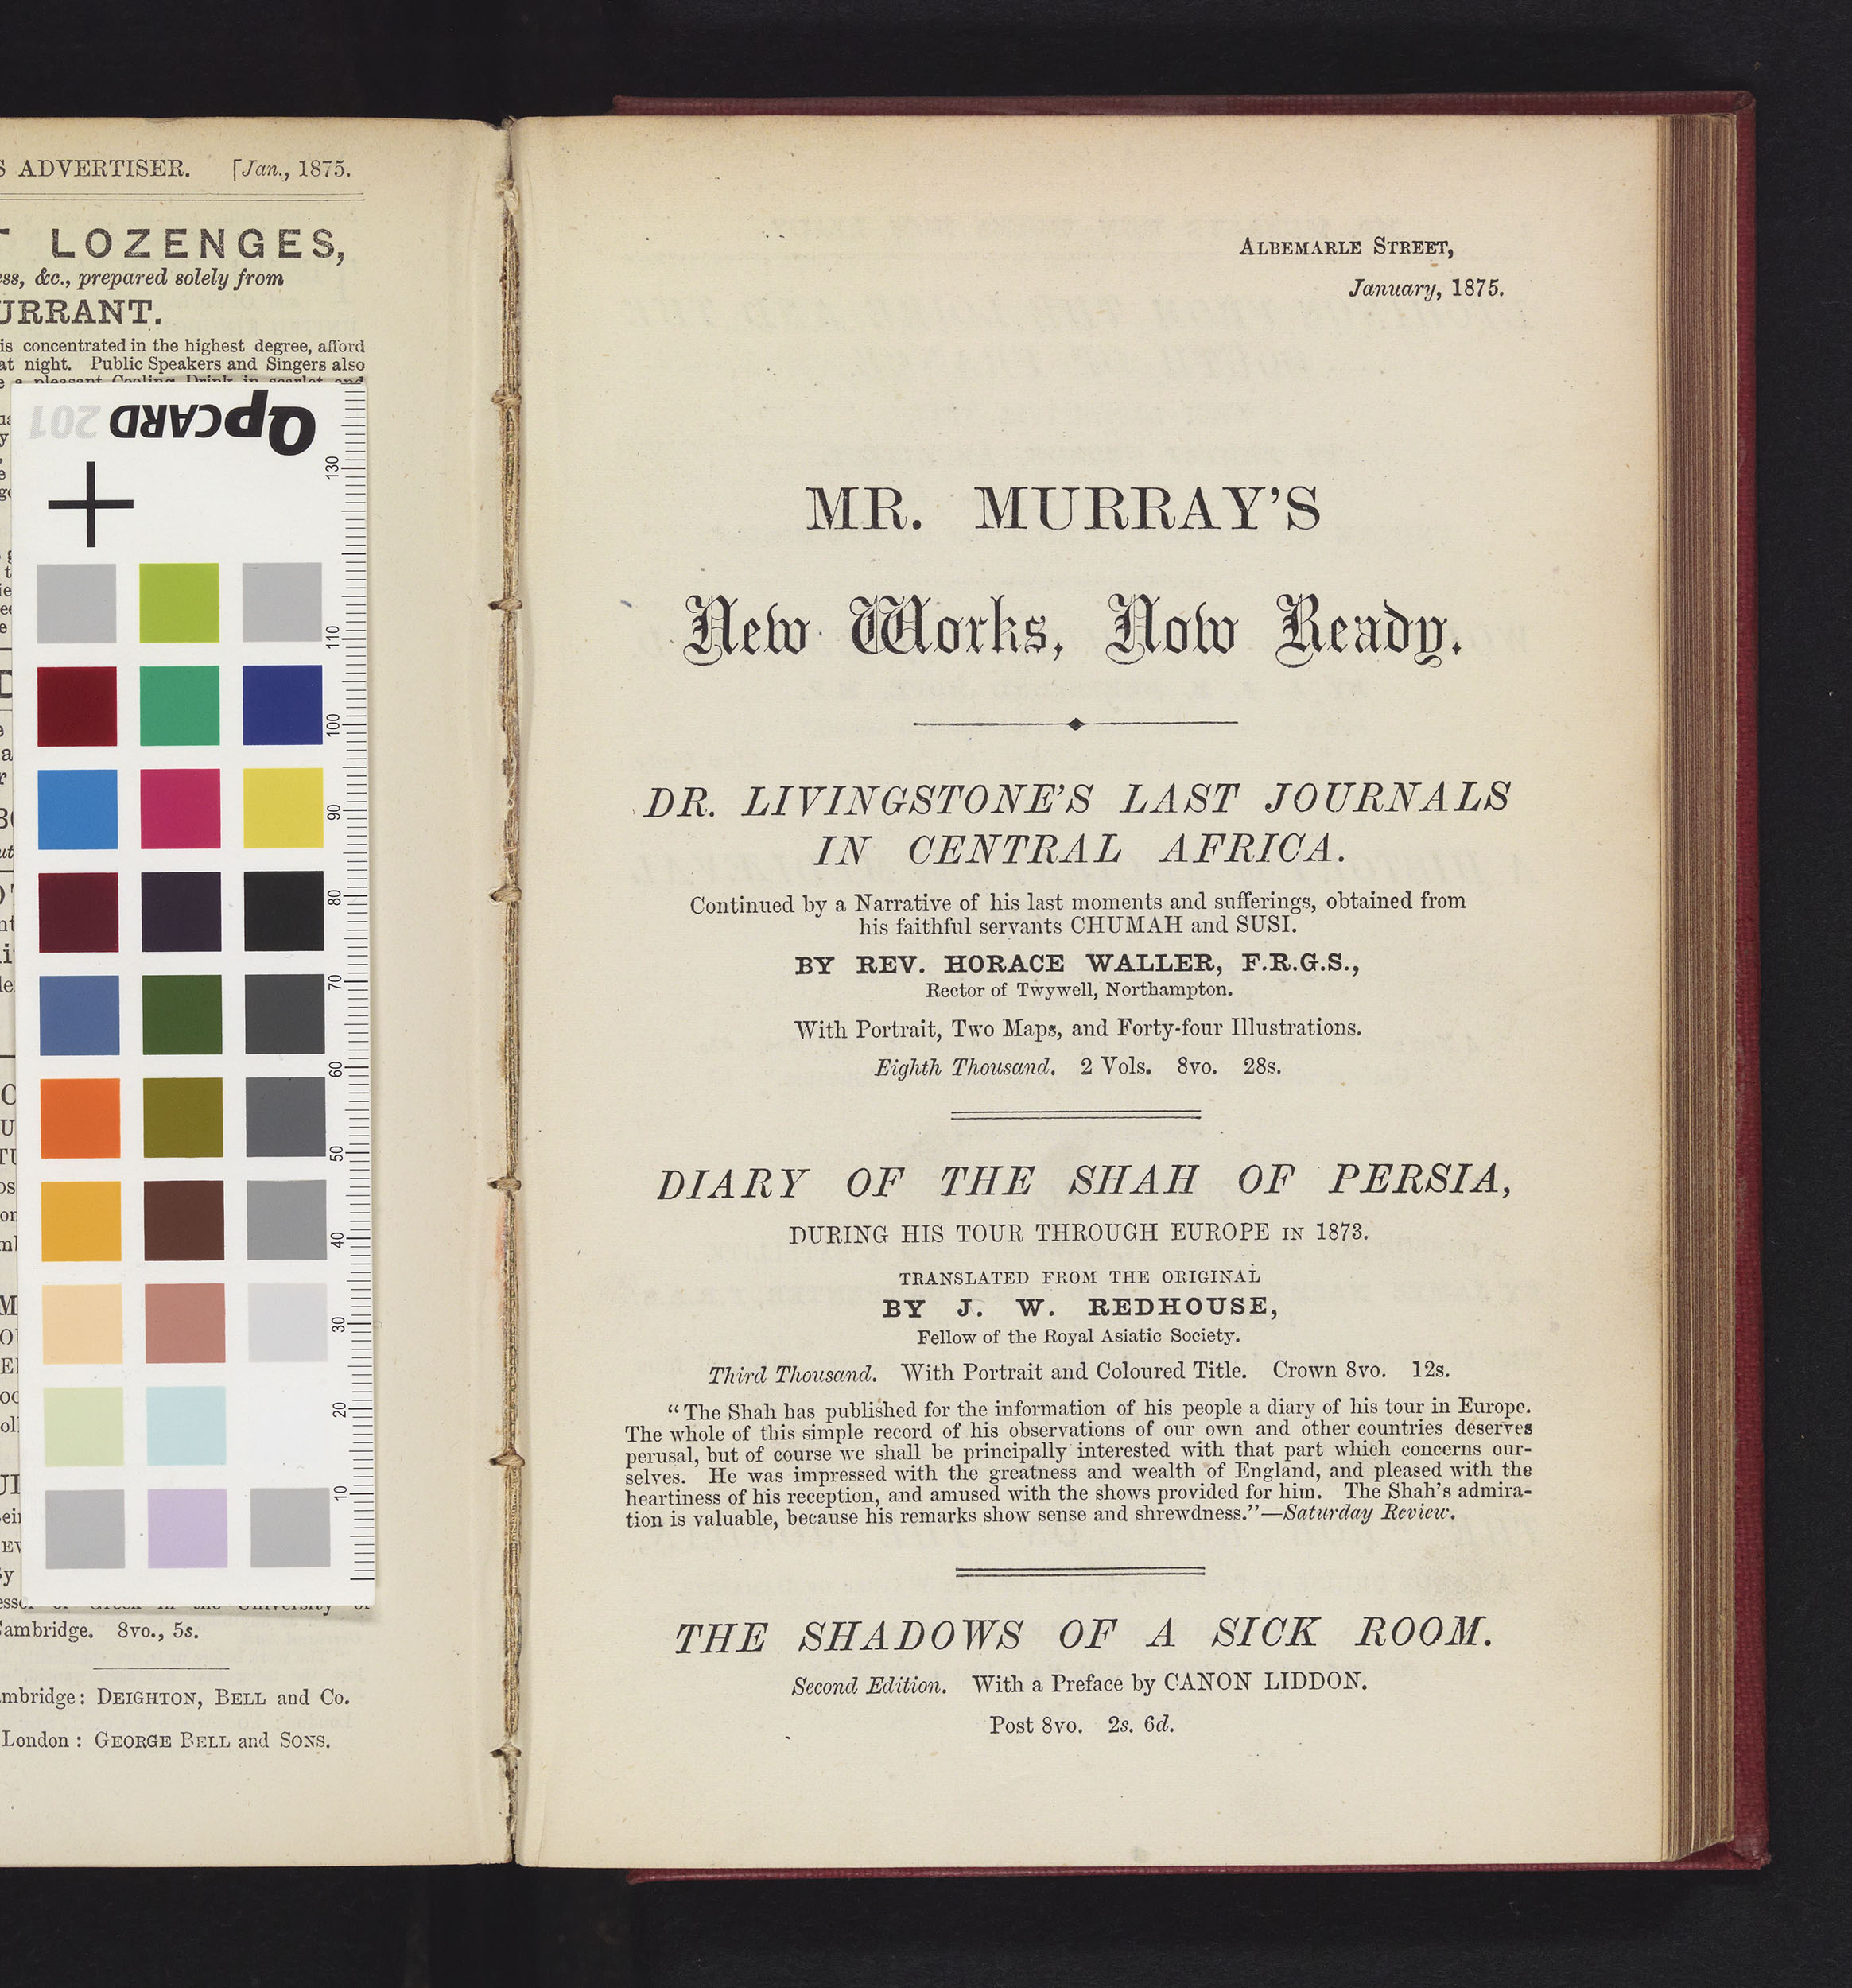 Trade Advert for Mr. Murray's New Works, Now Ready: Dr. Livingstone's Last Journals in Central Africa, Quarterly Review, 138 (January-April 1875): January 1875, 1. Copyright National Library of Scotland. Creative Commons Share-alike 2.5 UK: Scotland (https://creativecommons.org/licenses/by-nc-sa/2.5/scotland/).